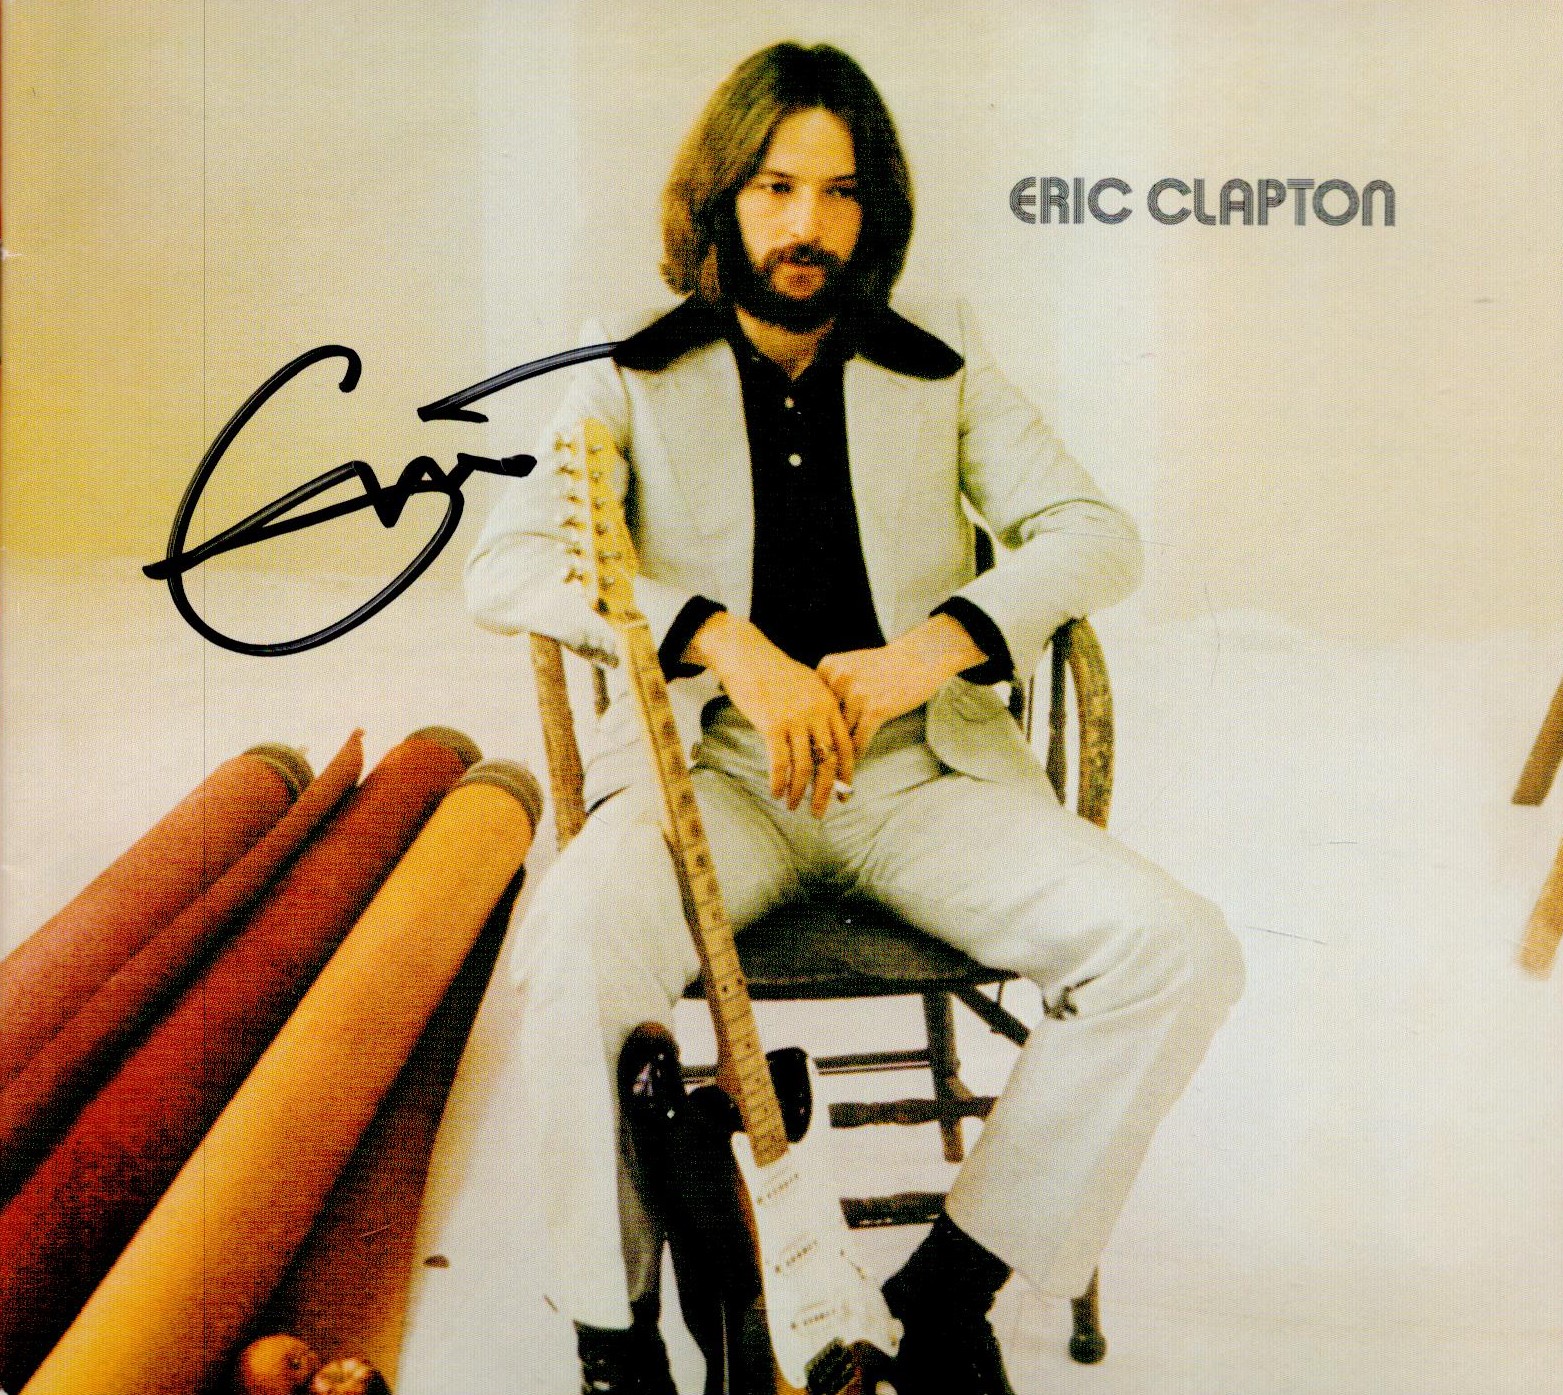 Eric Clapton Signed Music Booklet. Signed in black ink. Good Condition. All autographs come with a